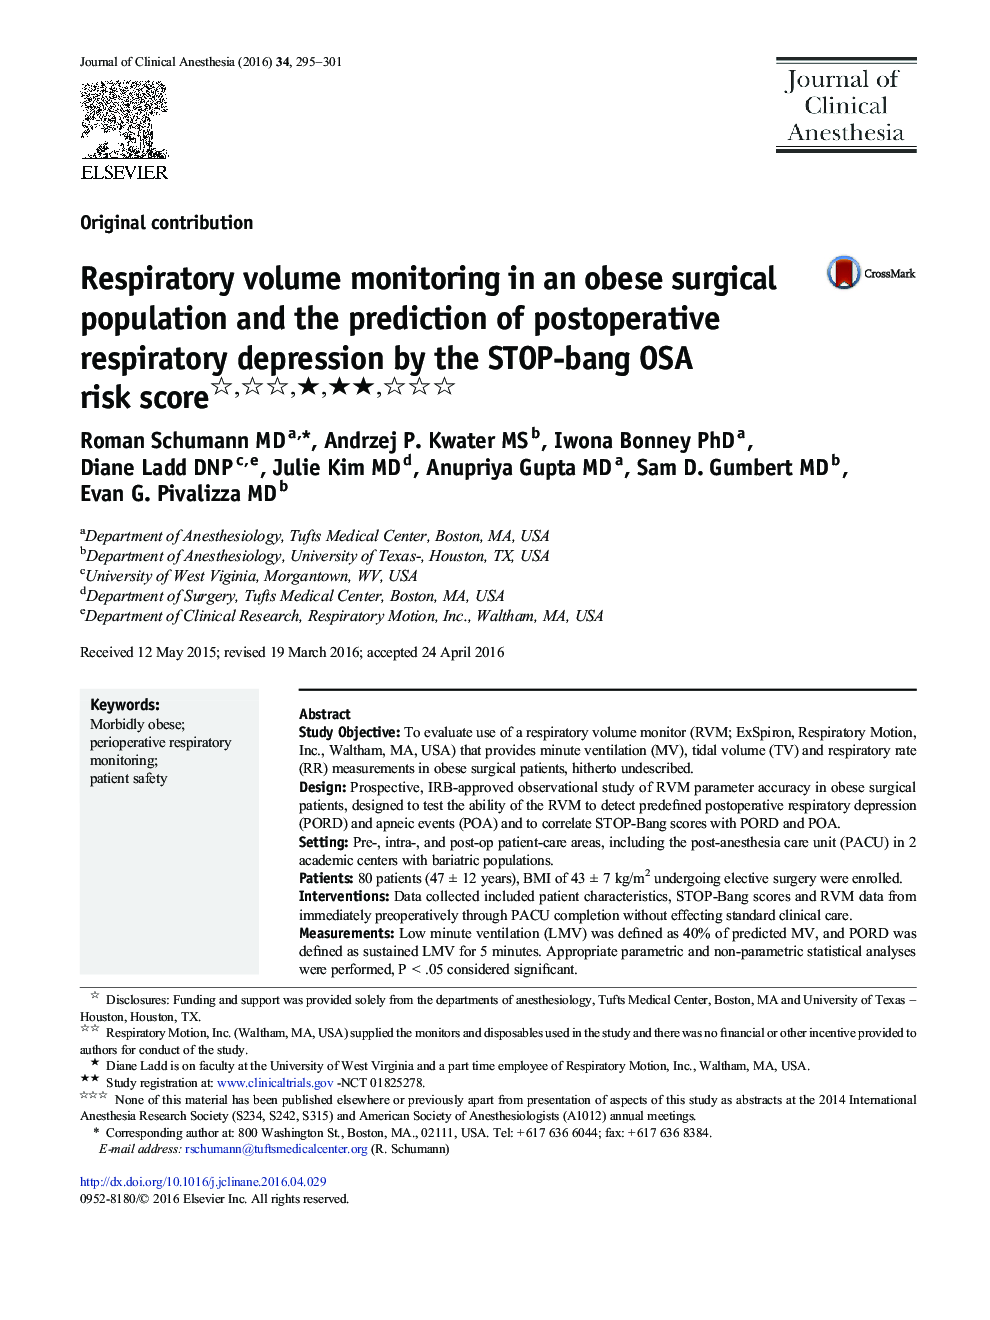 Respiratory volume monitoring in an obese surgical population and the prediction of postoperative respiratory depression by the STOP-bang OSA risk score